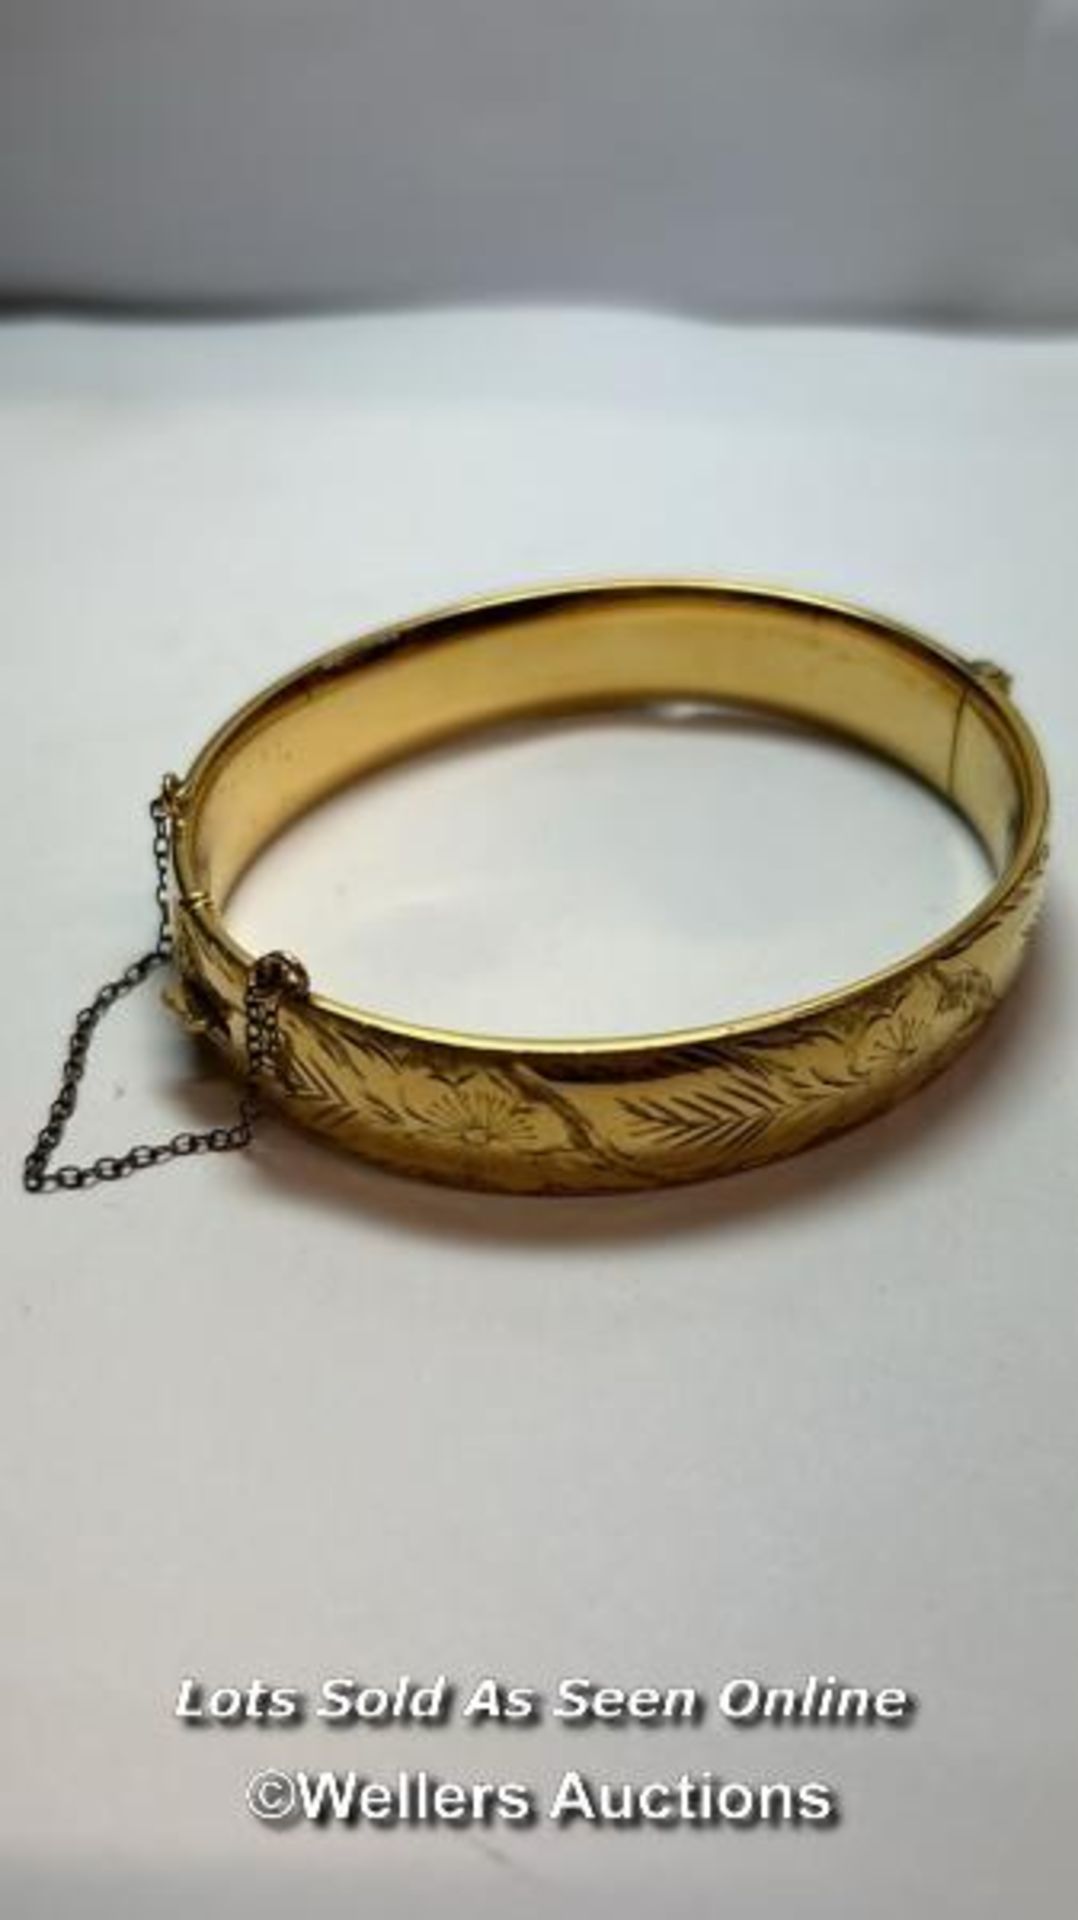 Rolled gold bangle with Excaliber box / SF - Image 3 of 5